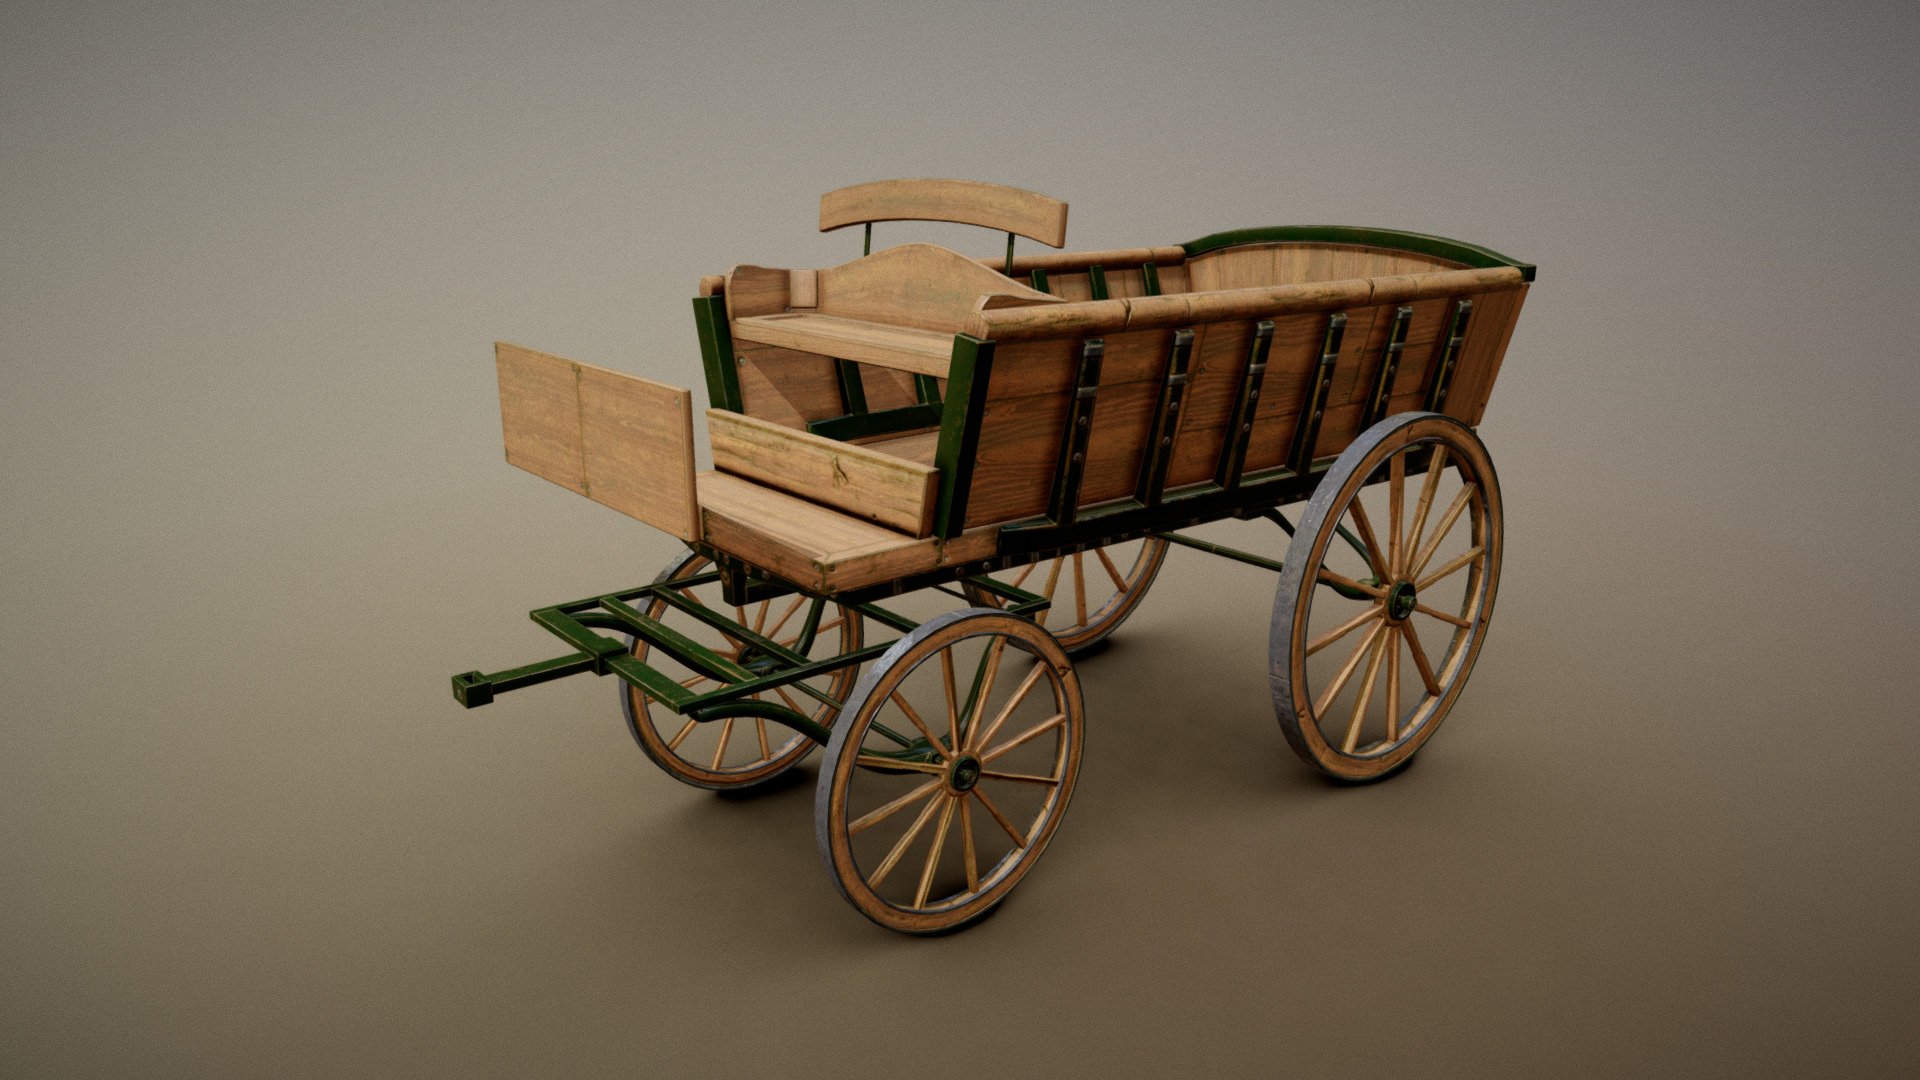 A sturdy Work Wagon from the 19th century,
Ready for game engines and ready to animate 3d model